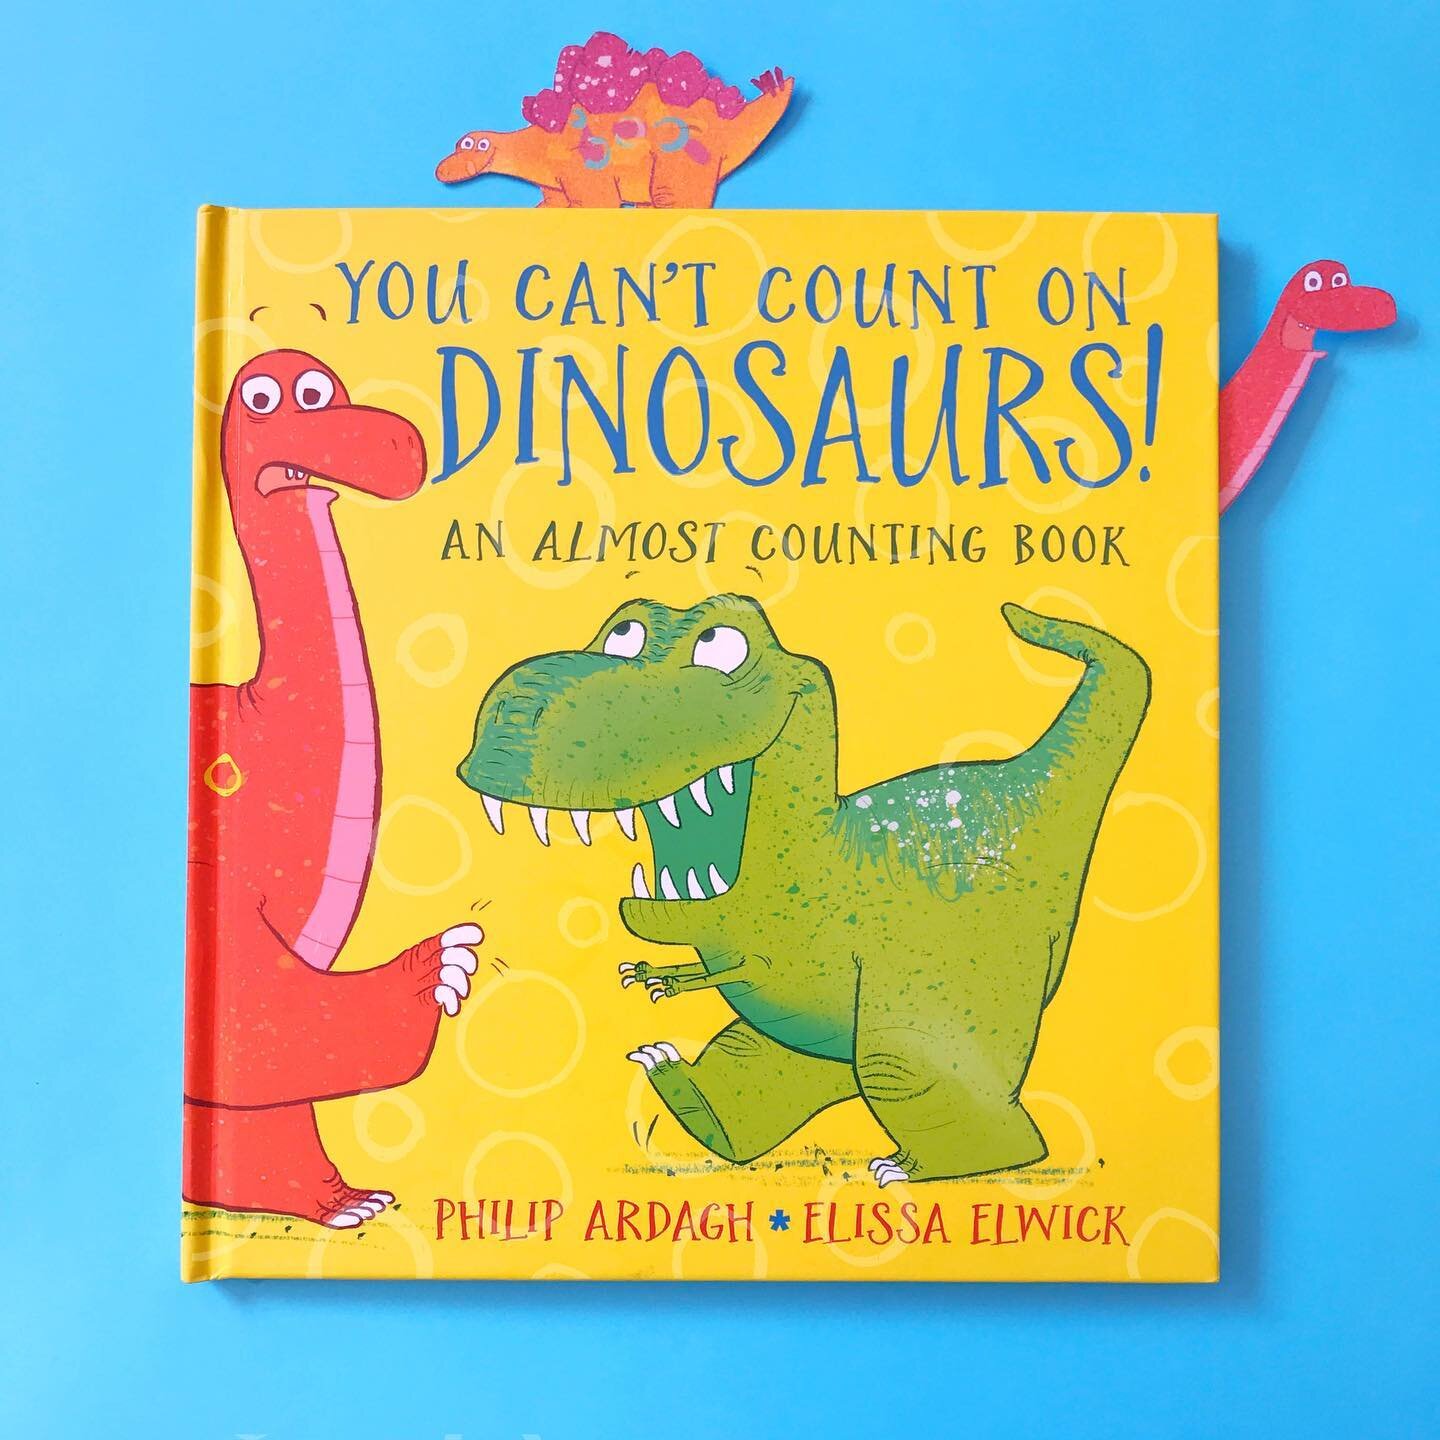 I&rsquo;m doing an Instagram Takeover at @bigpicturebooks for the next three days, talking all things You Can&rsquo;t Count on Dinosaurs, written by @philipardagh. I&rsquo;ll be showing pages from the book, concept art including character designs and